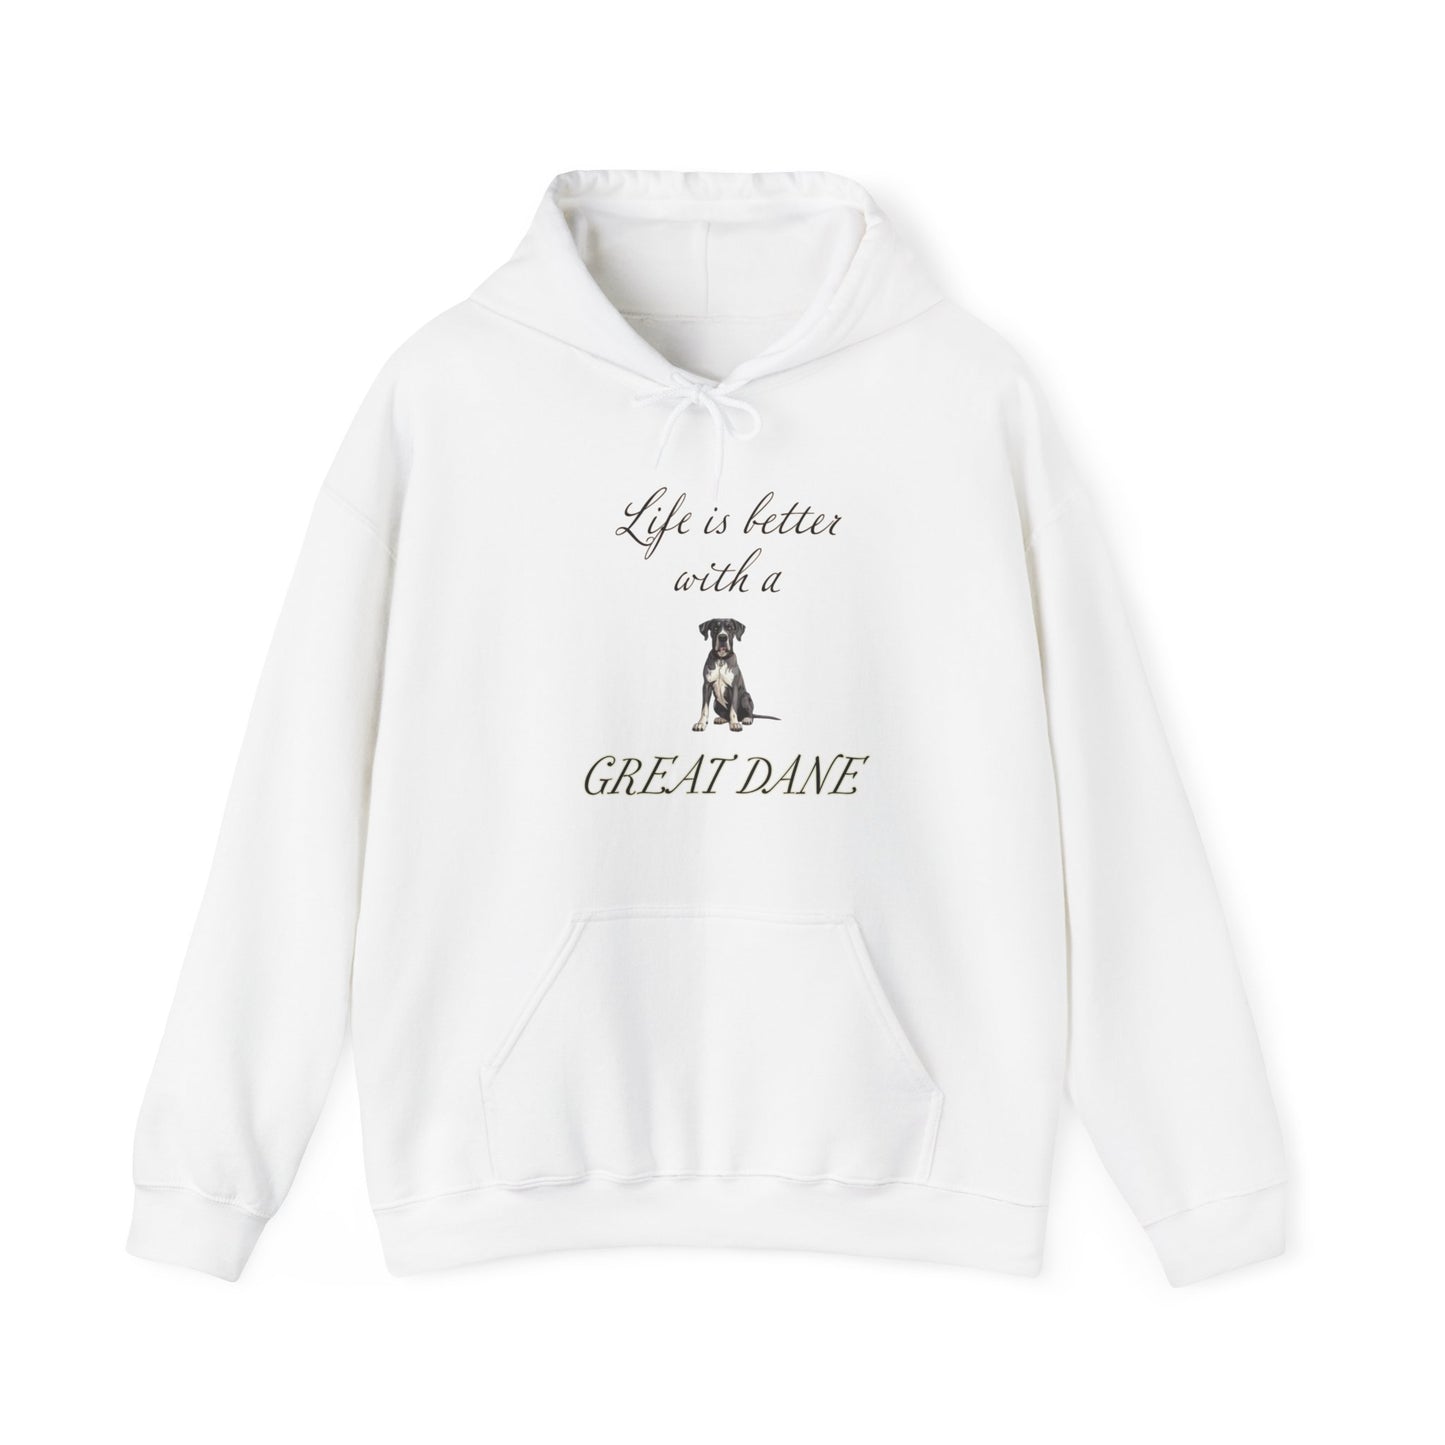 Life is Better with a Great Dane Hoodie - Unisex Heavy Blend Hooded Dog Mom or Dog Dad Sweatshirt, gift for Dog Mom, Gift for Dog Dad